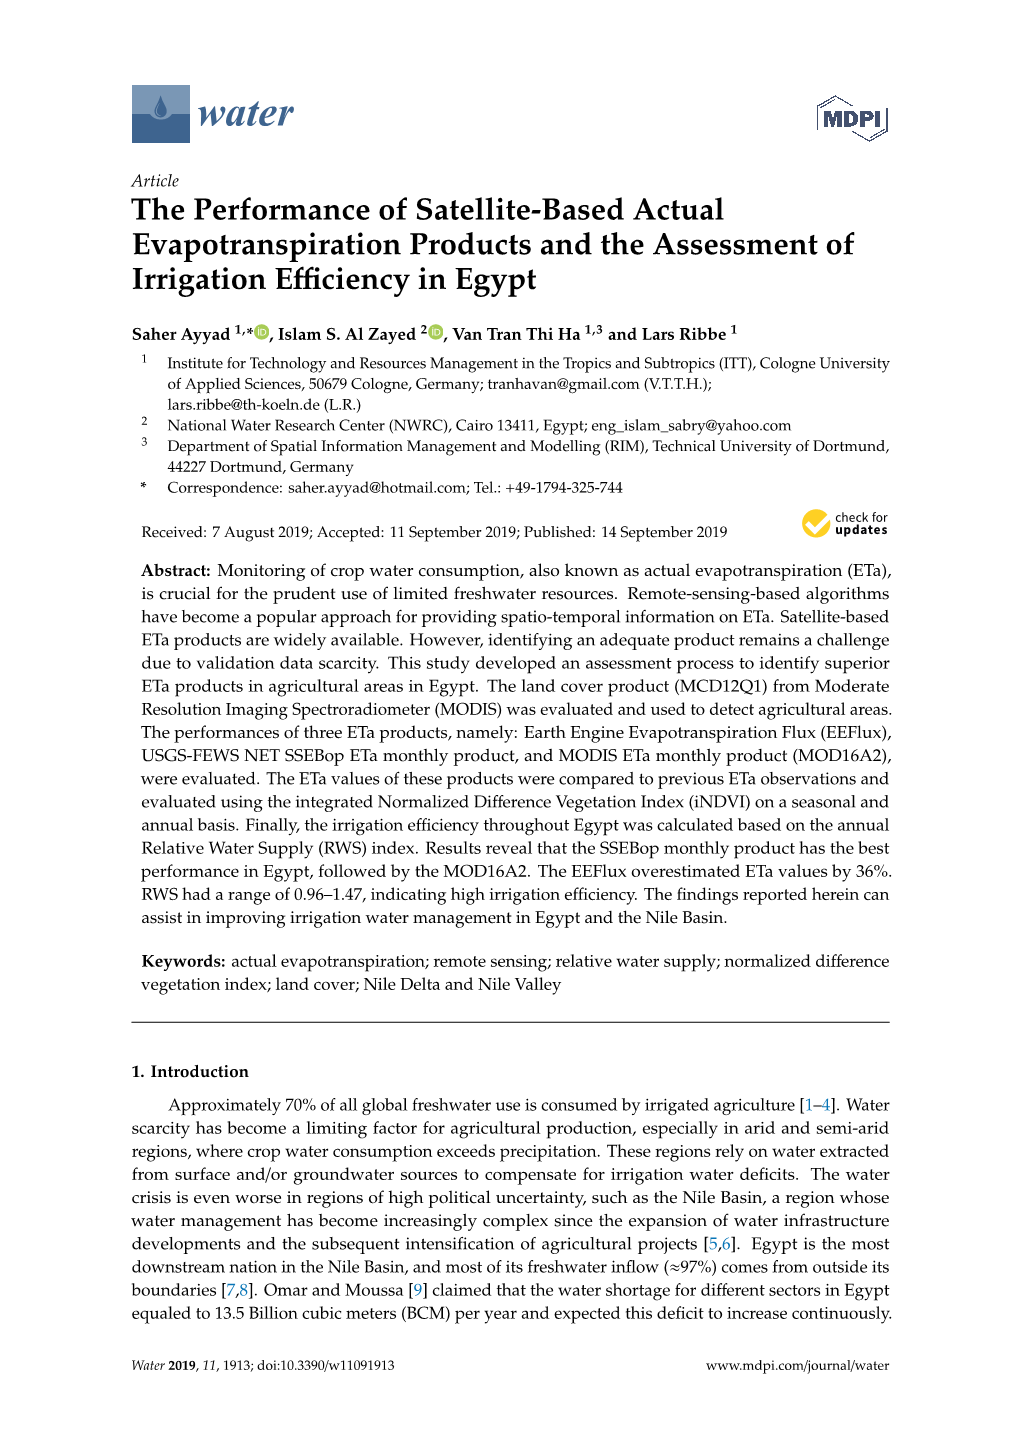 The Performance of Satellite-Based Actual Evapotranspiration Products and the Assessment of Irrigation Eﬃciency in Egypt